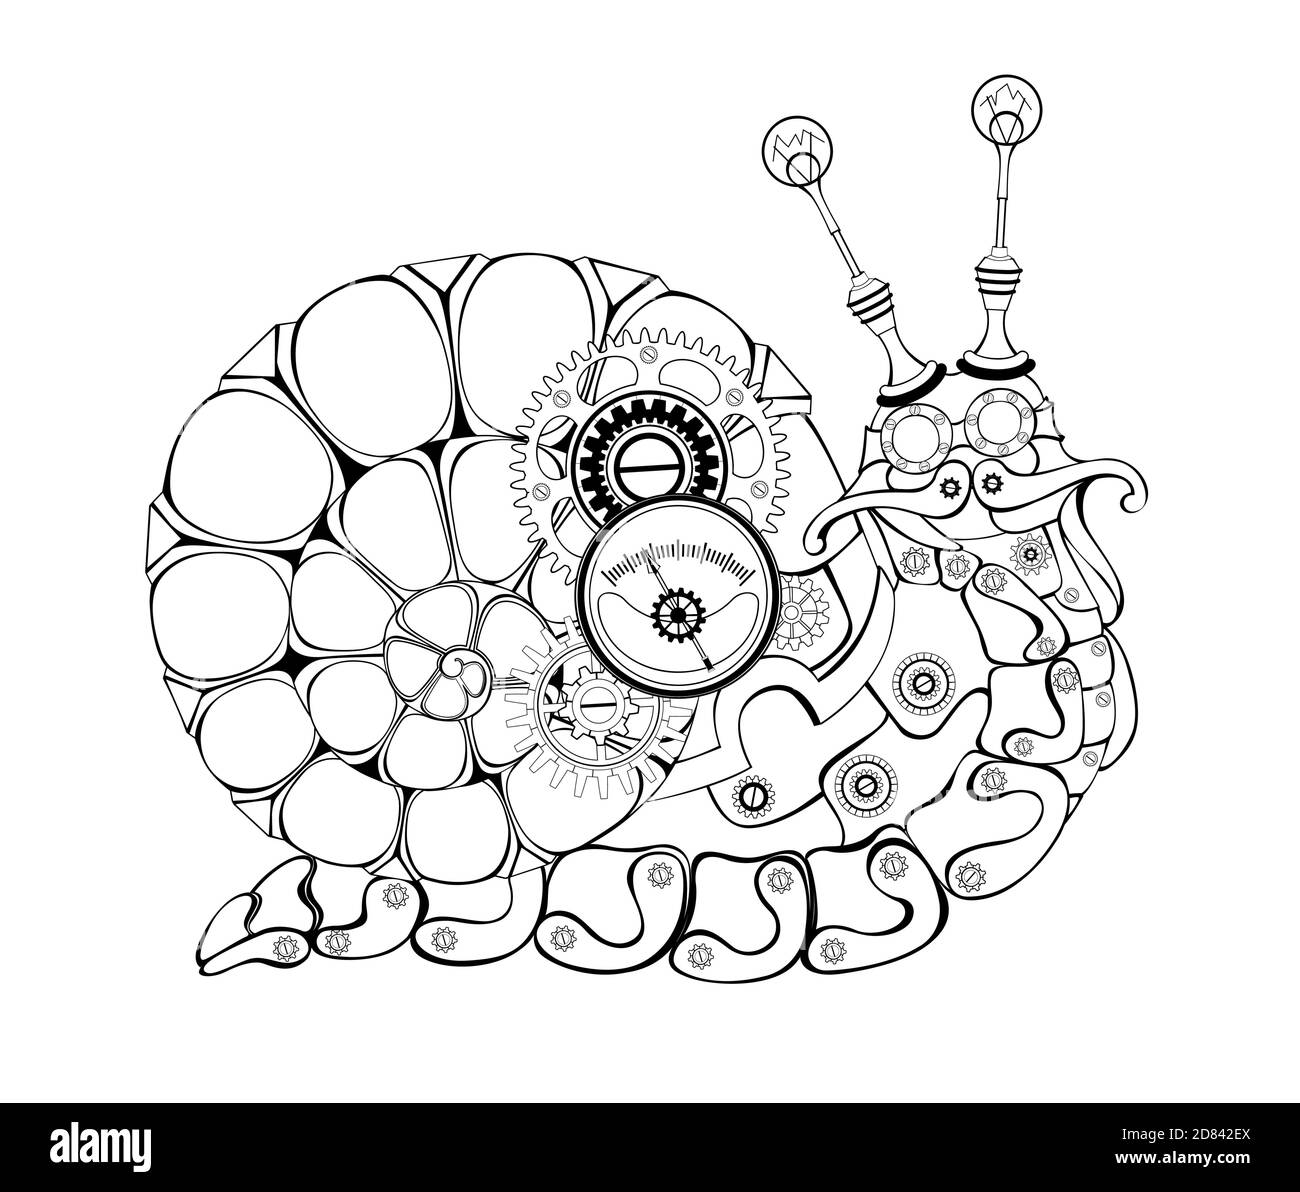 Antique, contour, mechanical snail with gears on white background. Steampunk style. Stock Vector